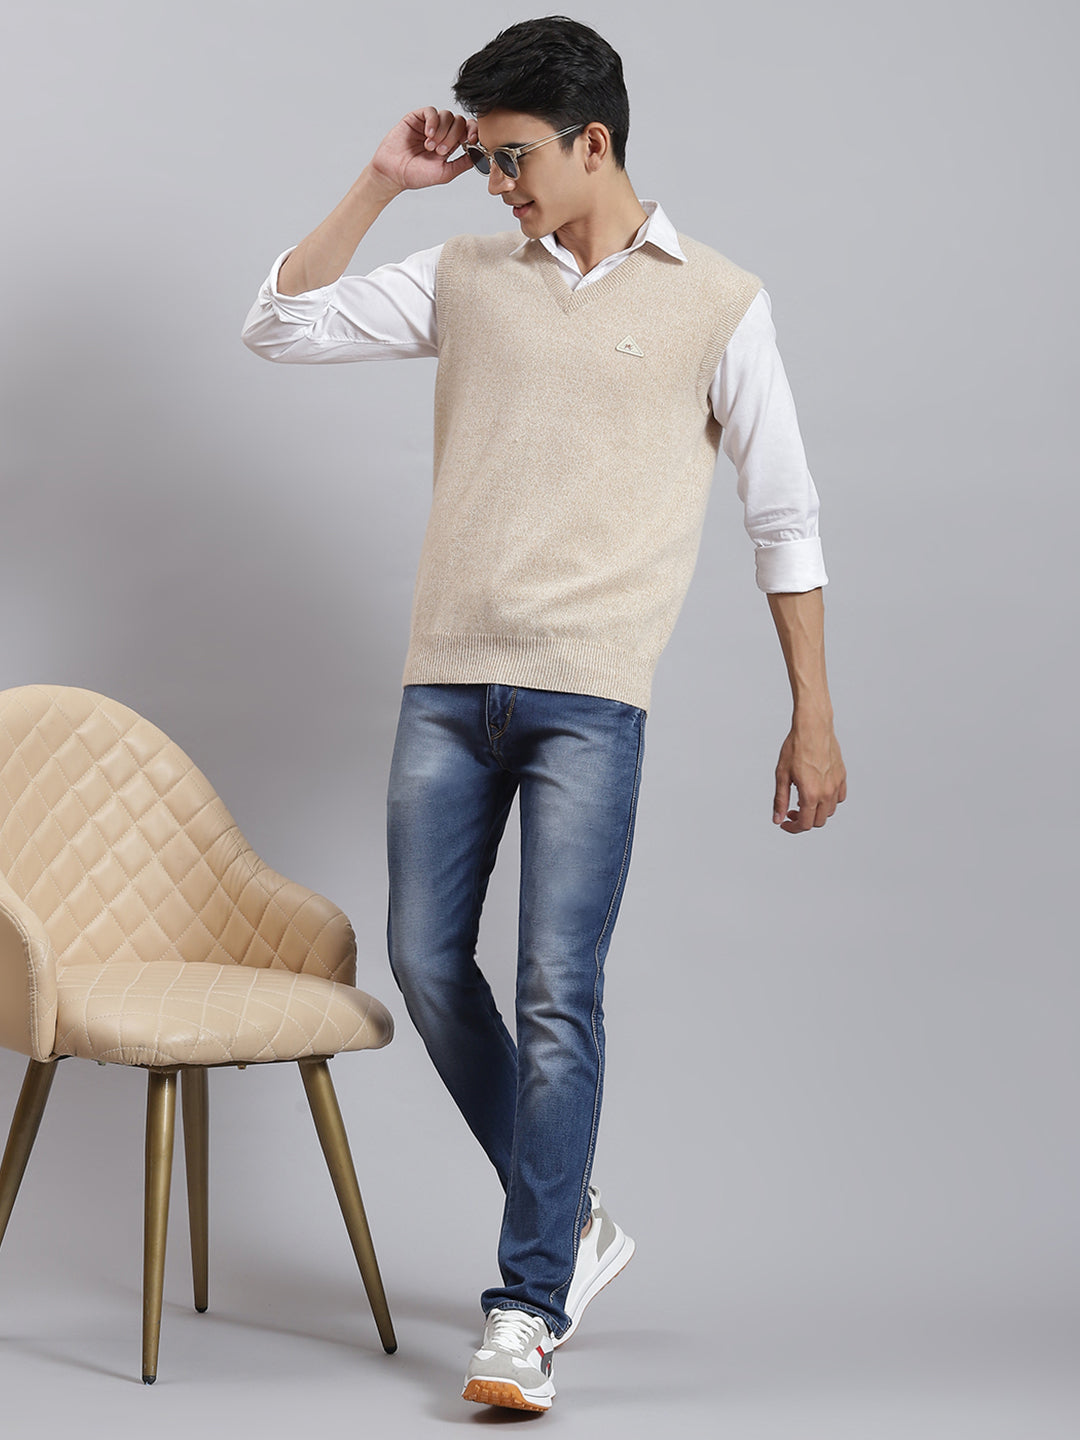 Men Beige Solid V Neck Sleeveless Sweaters/Pullovers